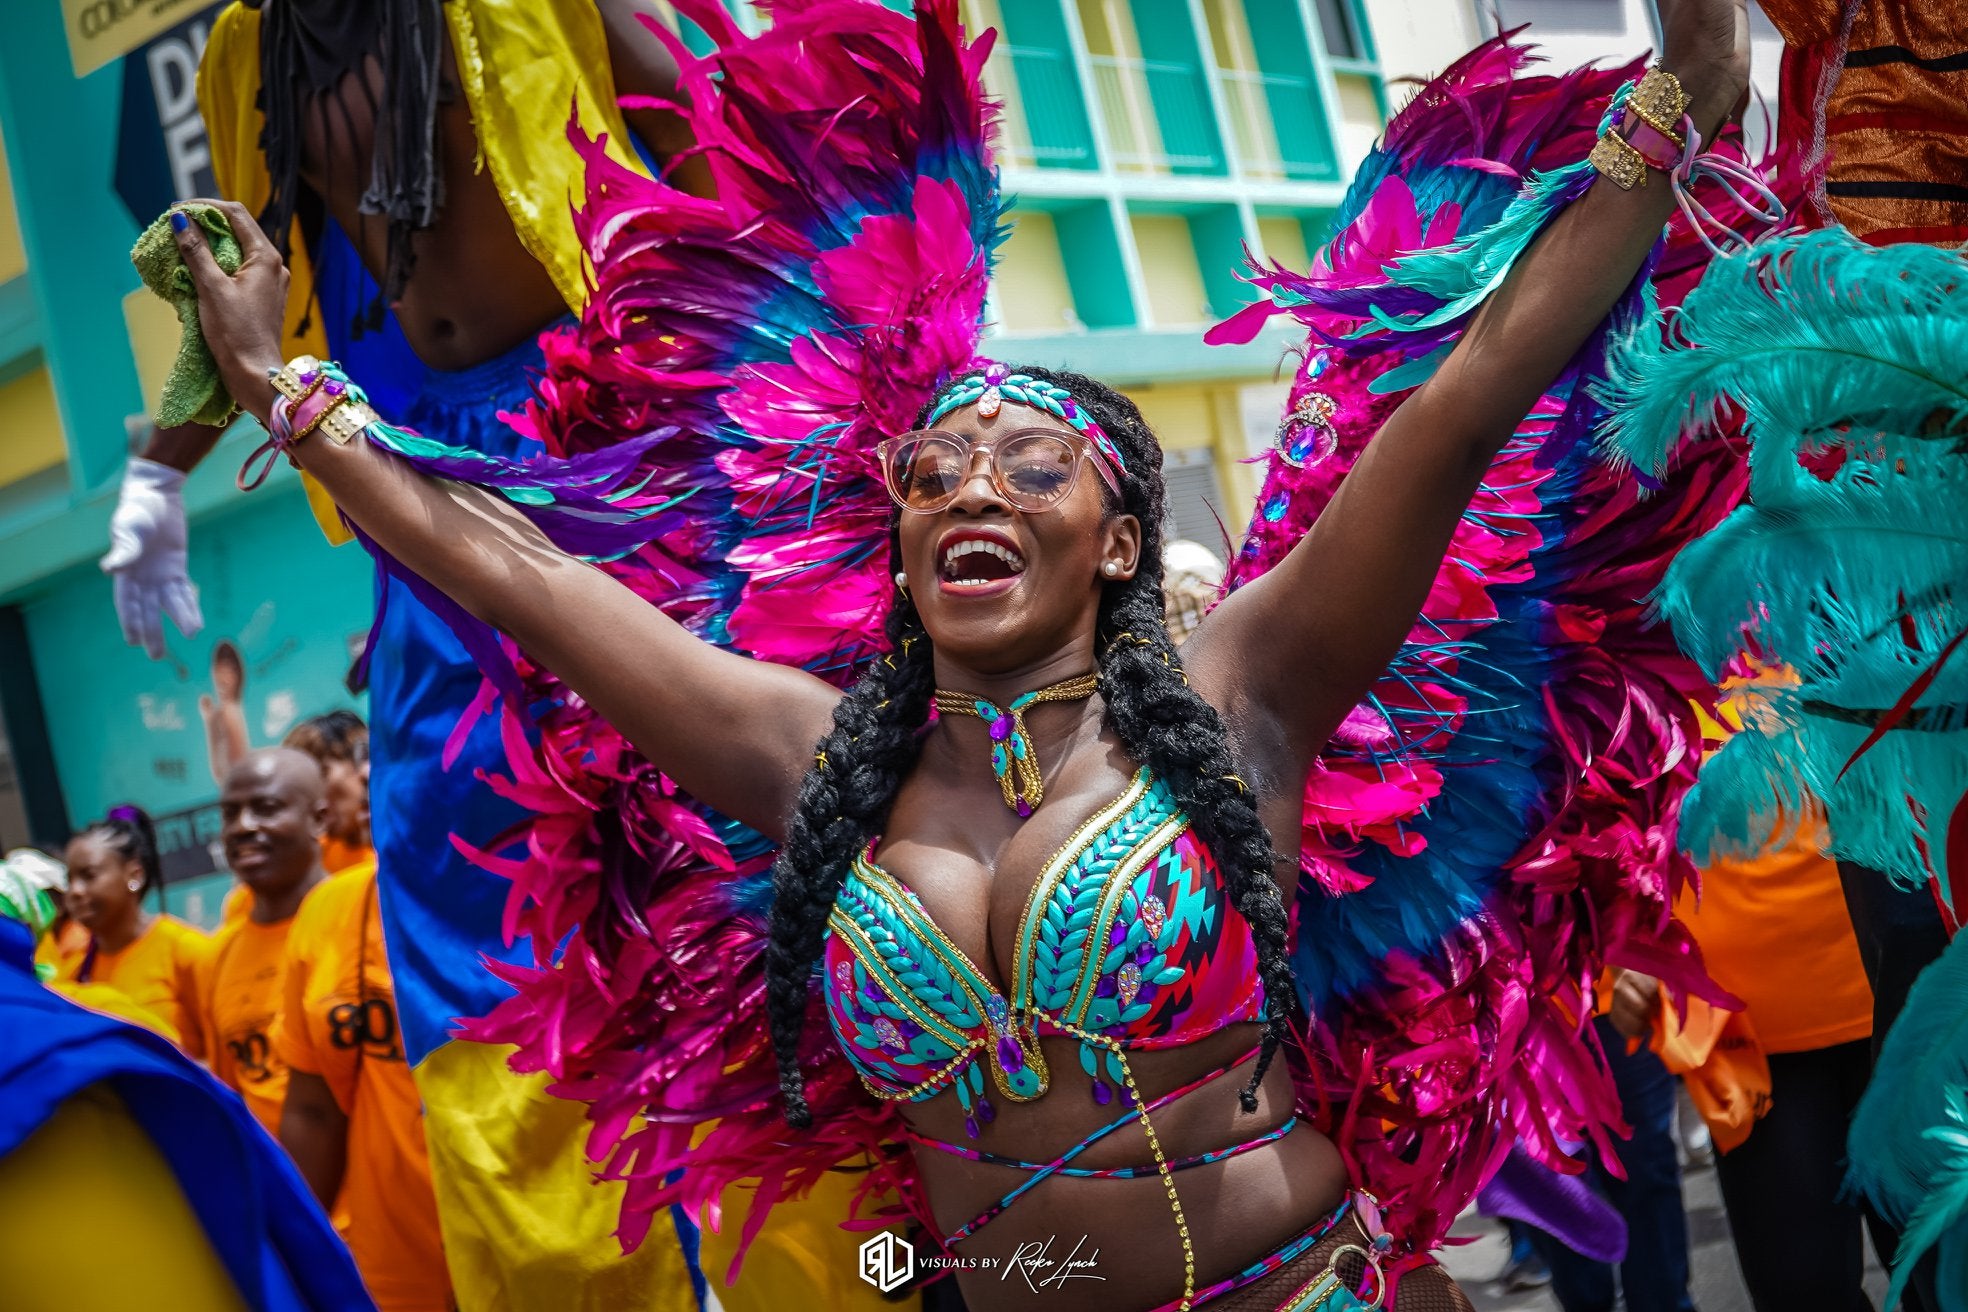 From incredible festivals to the best in bars and clubs, Barbados is the place to party